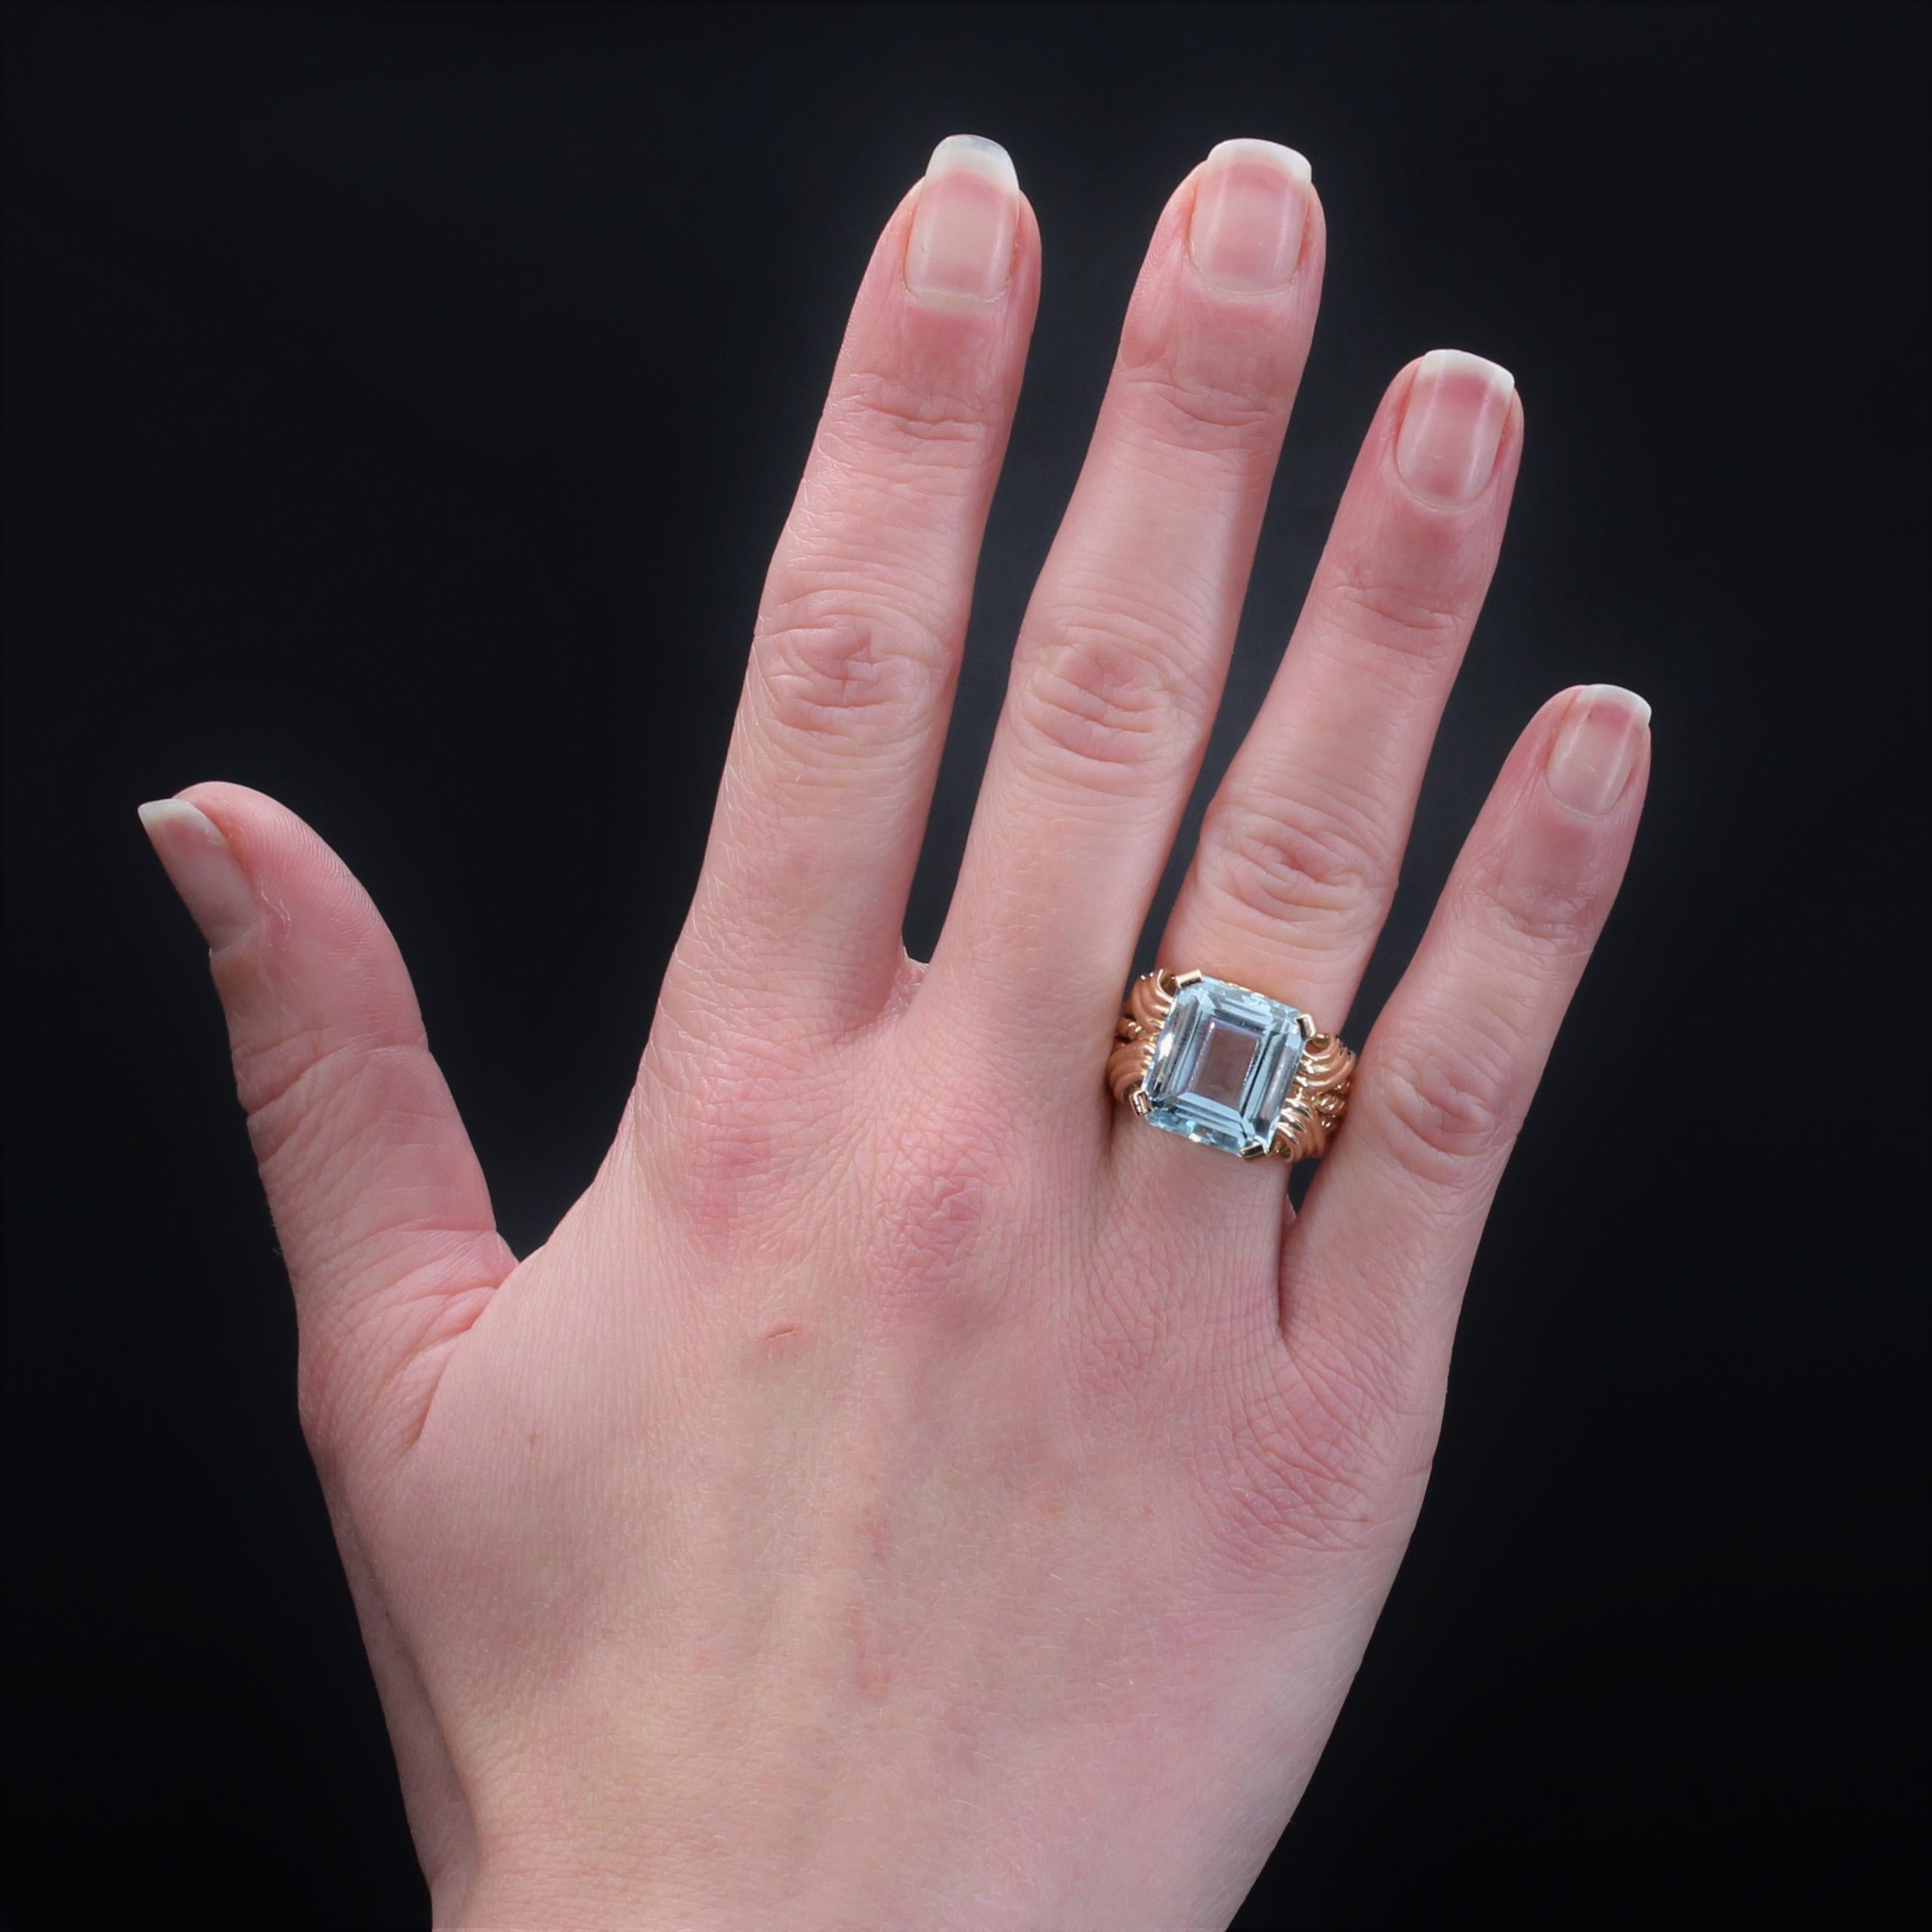 Ring in 18 karat rose gold, eagle head hallmark.
Voluminous retro ring, its body is made of 5 twisted rings that meet on top. A degrees- cut aquamarine is held to 4 flat claws and held on either side of 2x2 patterns of gadrooned waves.
Weight of the